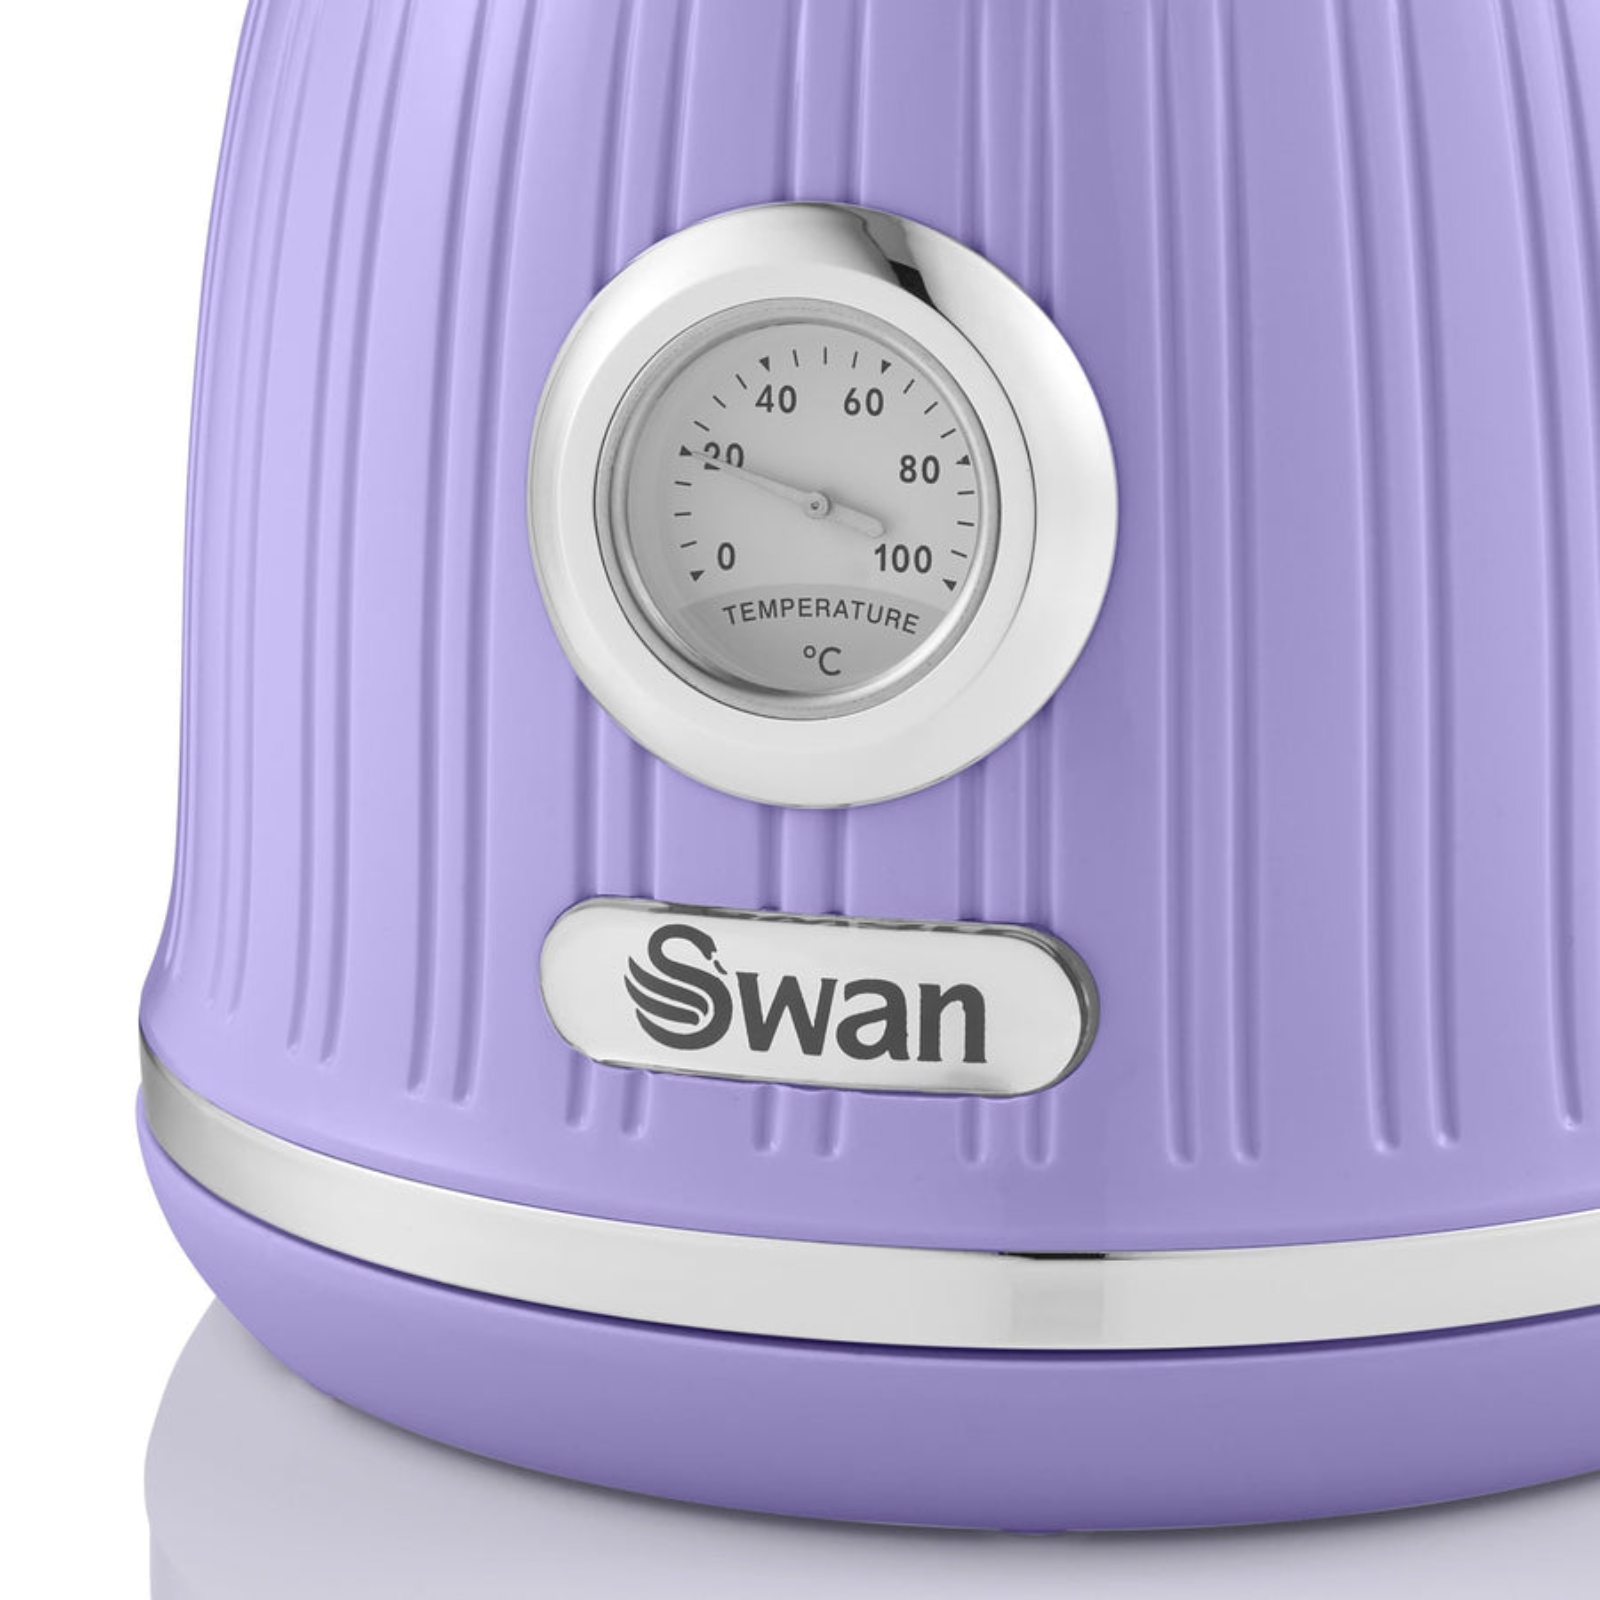 SWAN SK31040PURN 1.5L Retro jug kettle purple Brand New - Kettle and  Toaster Man